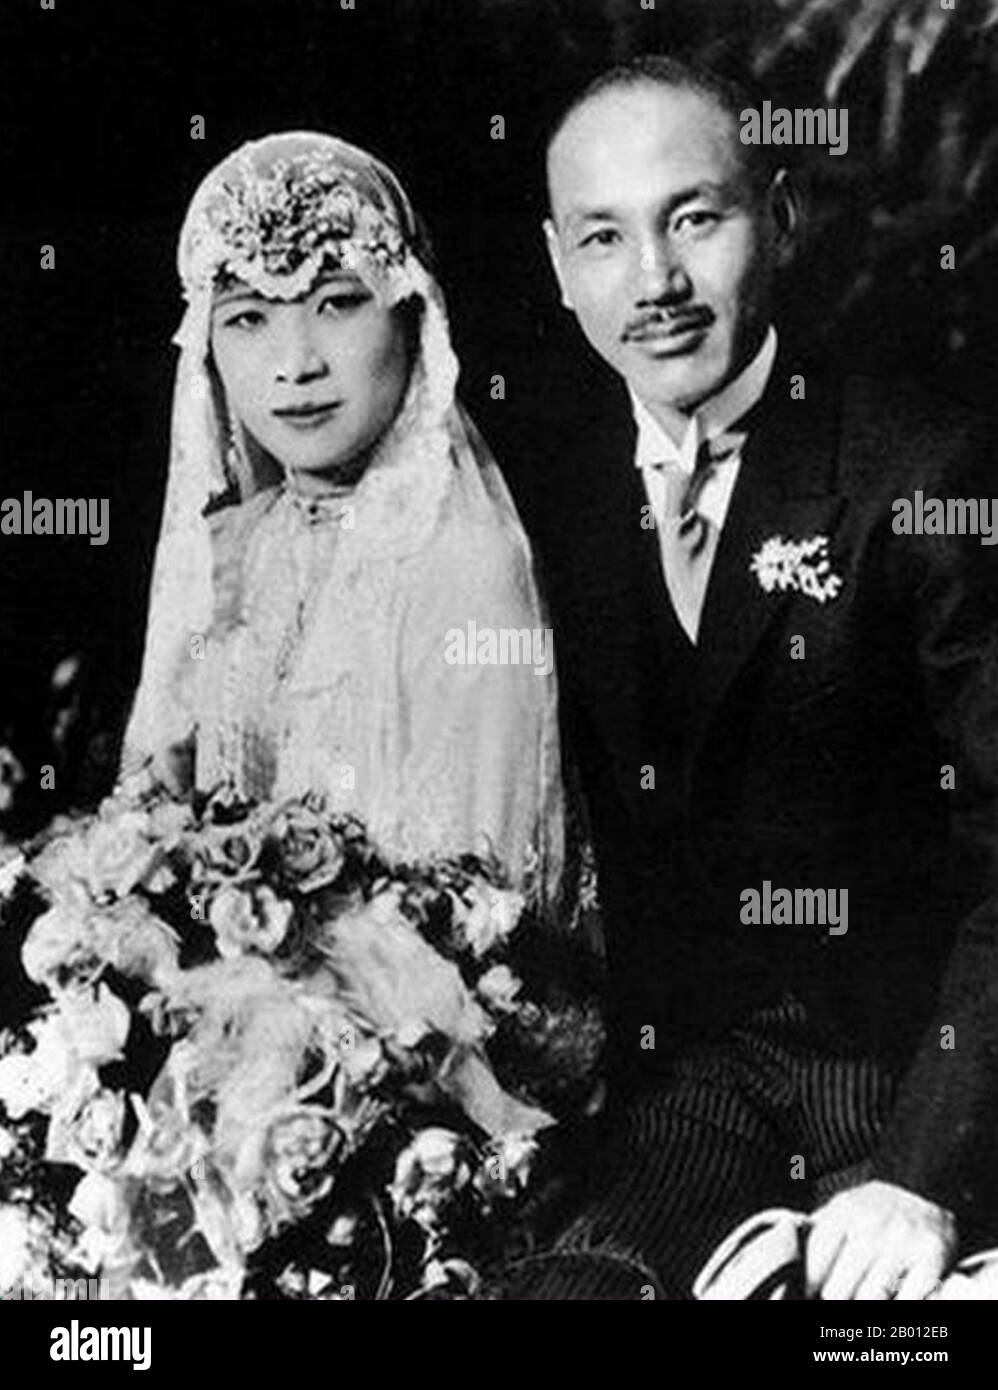 China/Taiwan: Soong May-ling (Song Meiling, 1898-2003), at her marriage to Chiang Kai-shek, Shanghai, 1 December, 1927.  Soong May-ling or Mei-ling, also known as Madame Chiang Kai-shek (Song Meiling, 1898-2003), First Lady of the Republic of China (ROC) and wife of President Chiang Kai-shek. She was a politician and painter. The youngest and the last surviving of the three Soong sisters, she played a prominent role in the politics of the Republic of China and was the sister of Song Qingling, wife of President Sun Yat-sen, the founder of the Chinese Republic (1912). Stock Photo